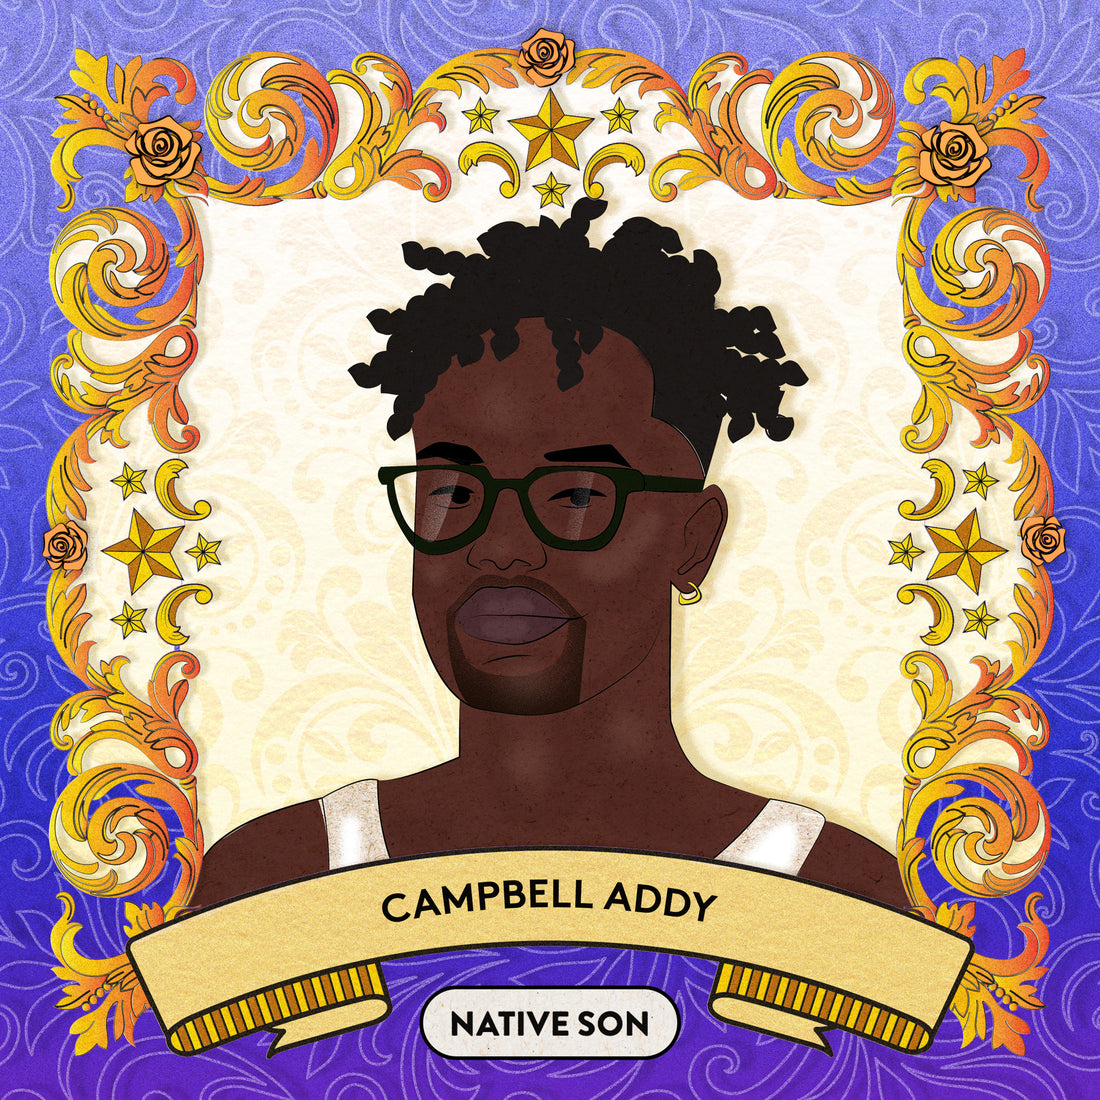 CAMPBELL ADDY